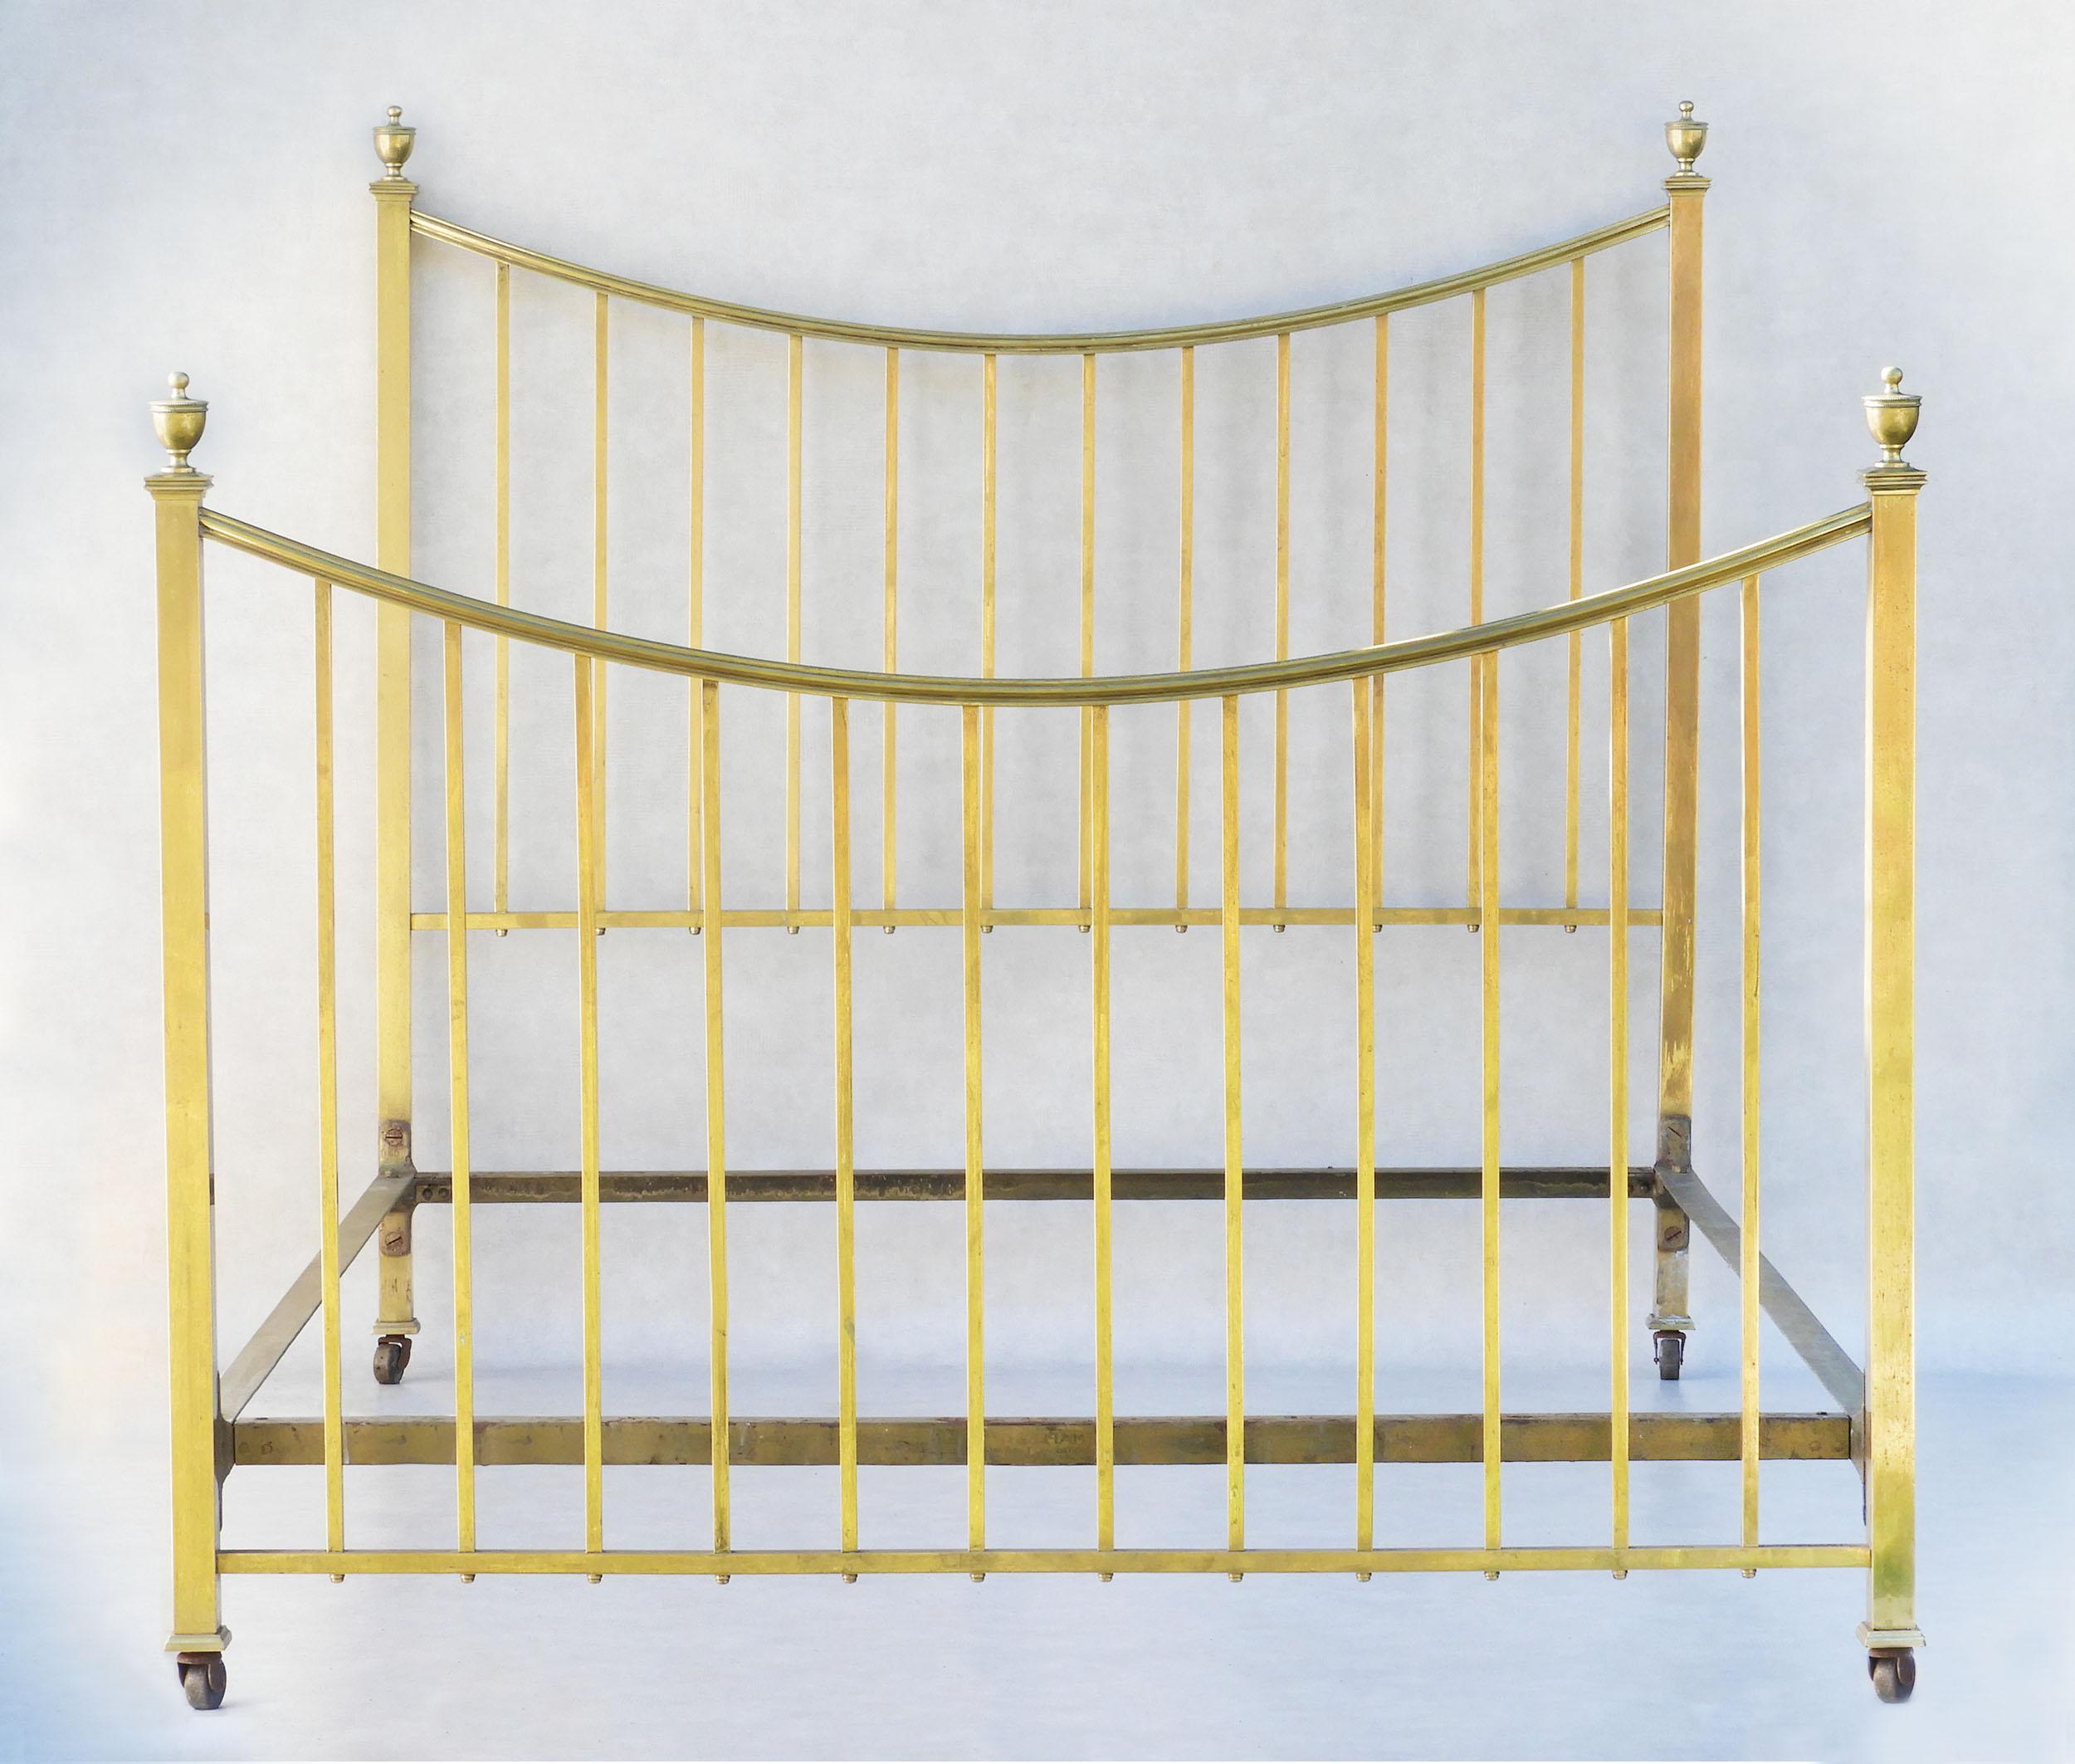 Antique brass bed By Maple & Co C1900

Antique brass bed by English furniture maker Maple & Company of Tottenham Court Road.

A good quality bed with original makers label. In very good condition, sturdy and strong with nice patina, clean but